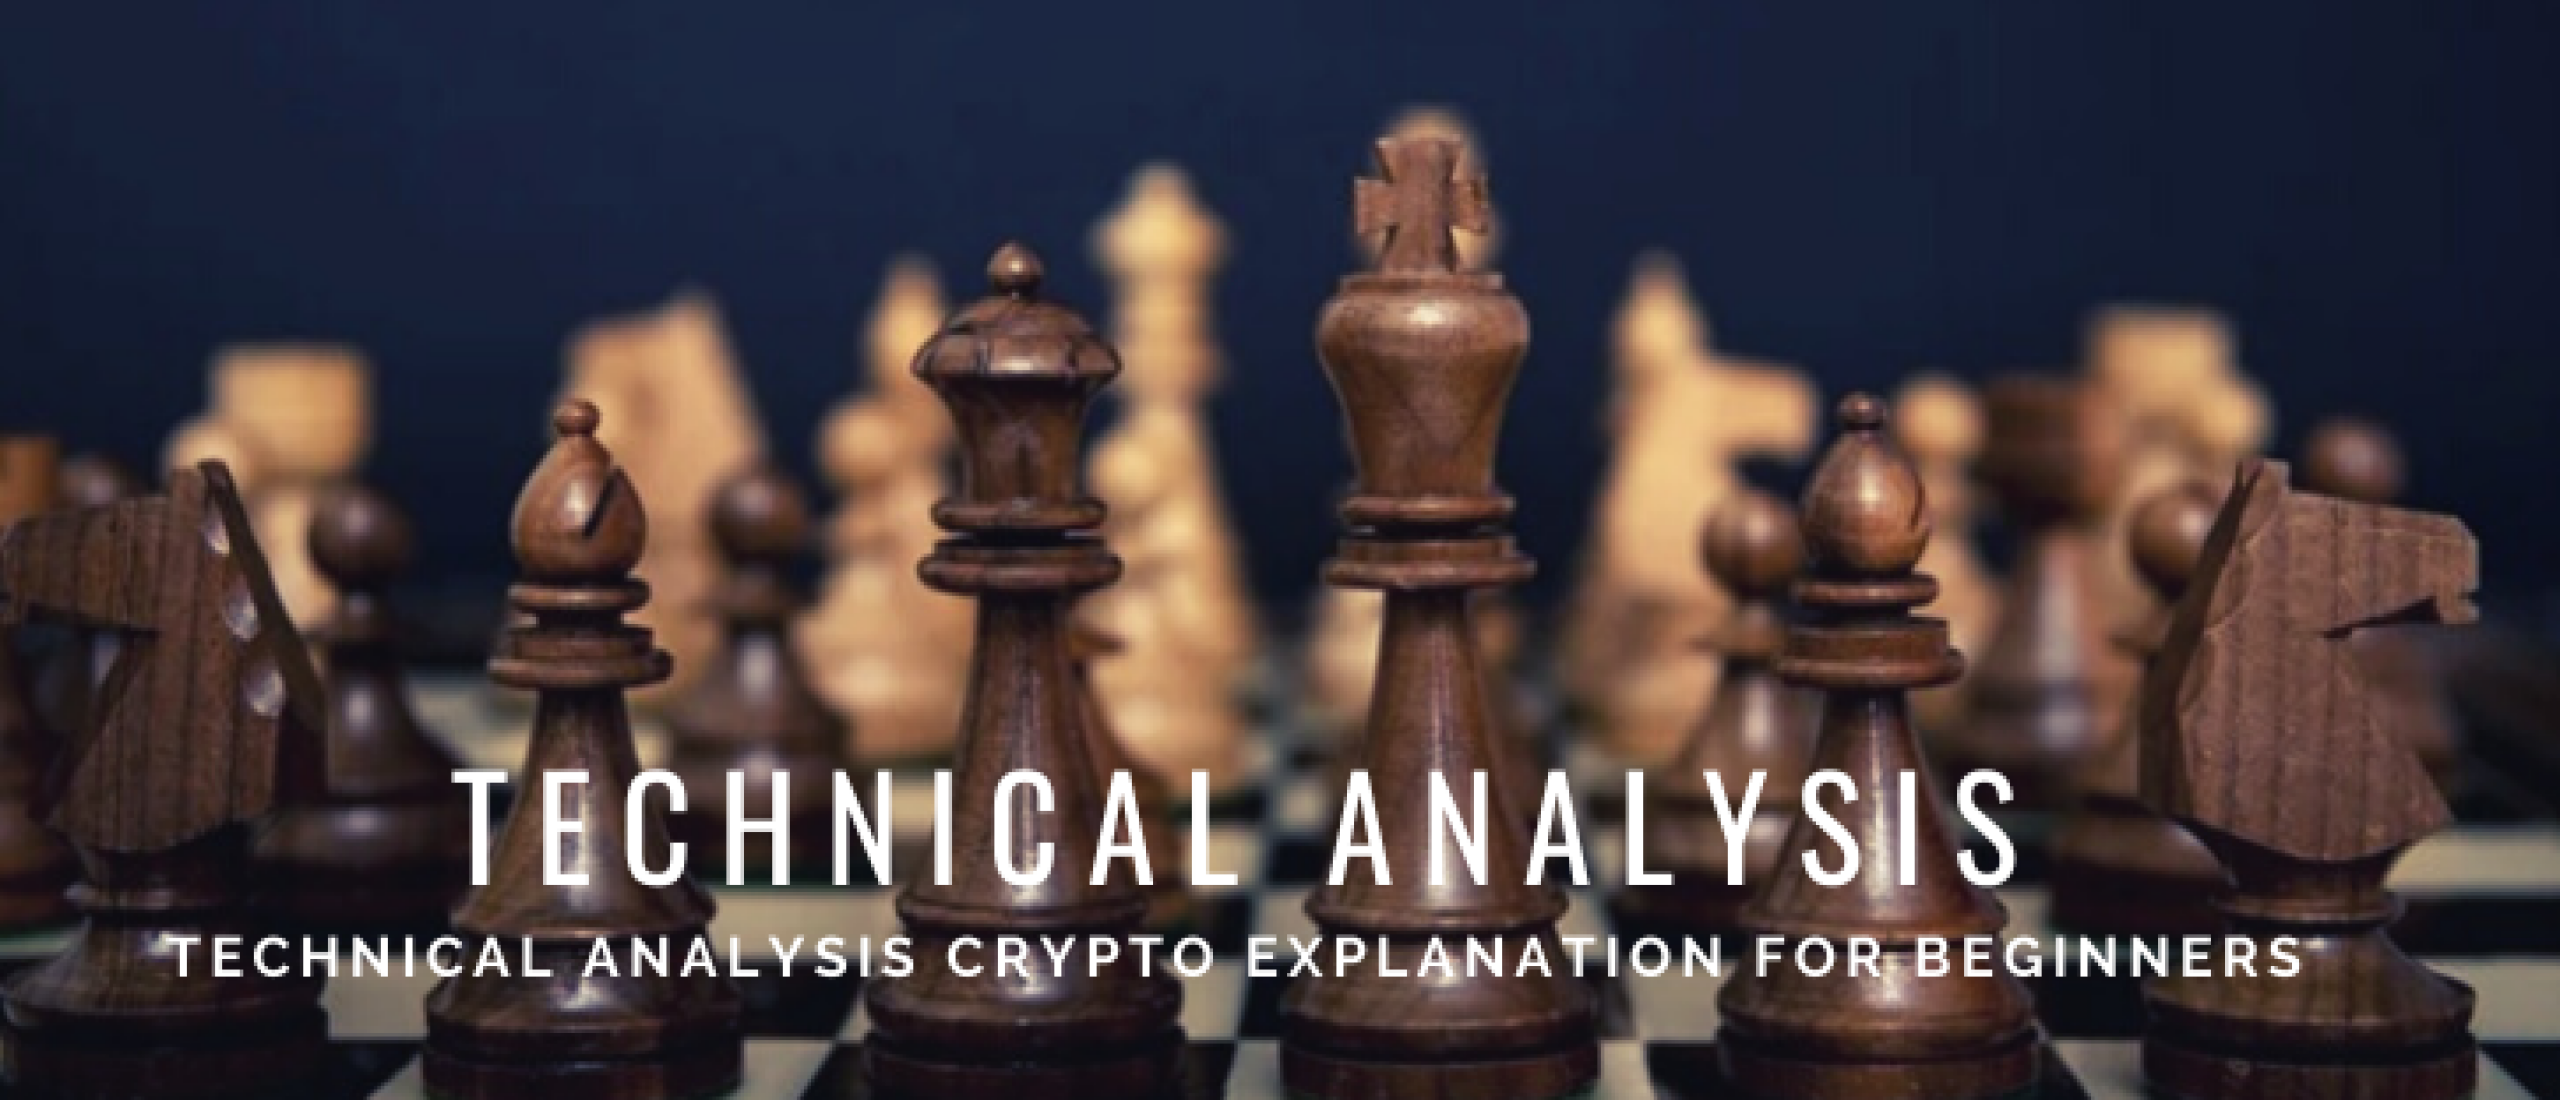 Technical Analysis Crypto: Explanation of Basics for Beginners